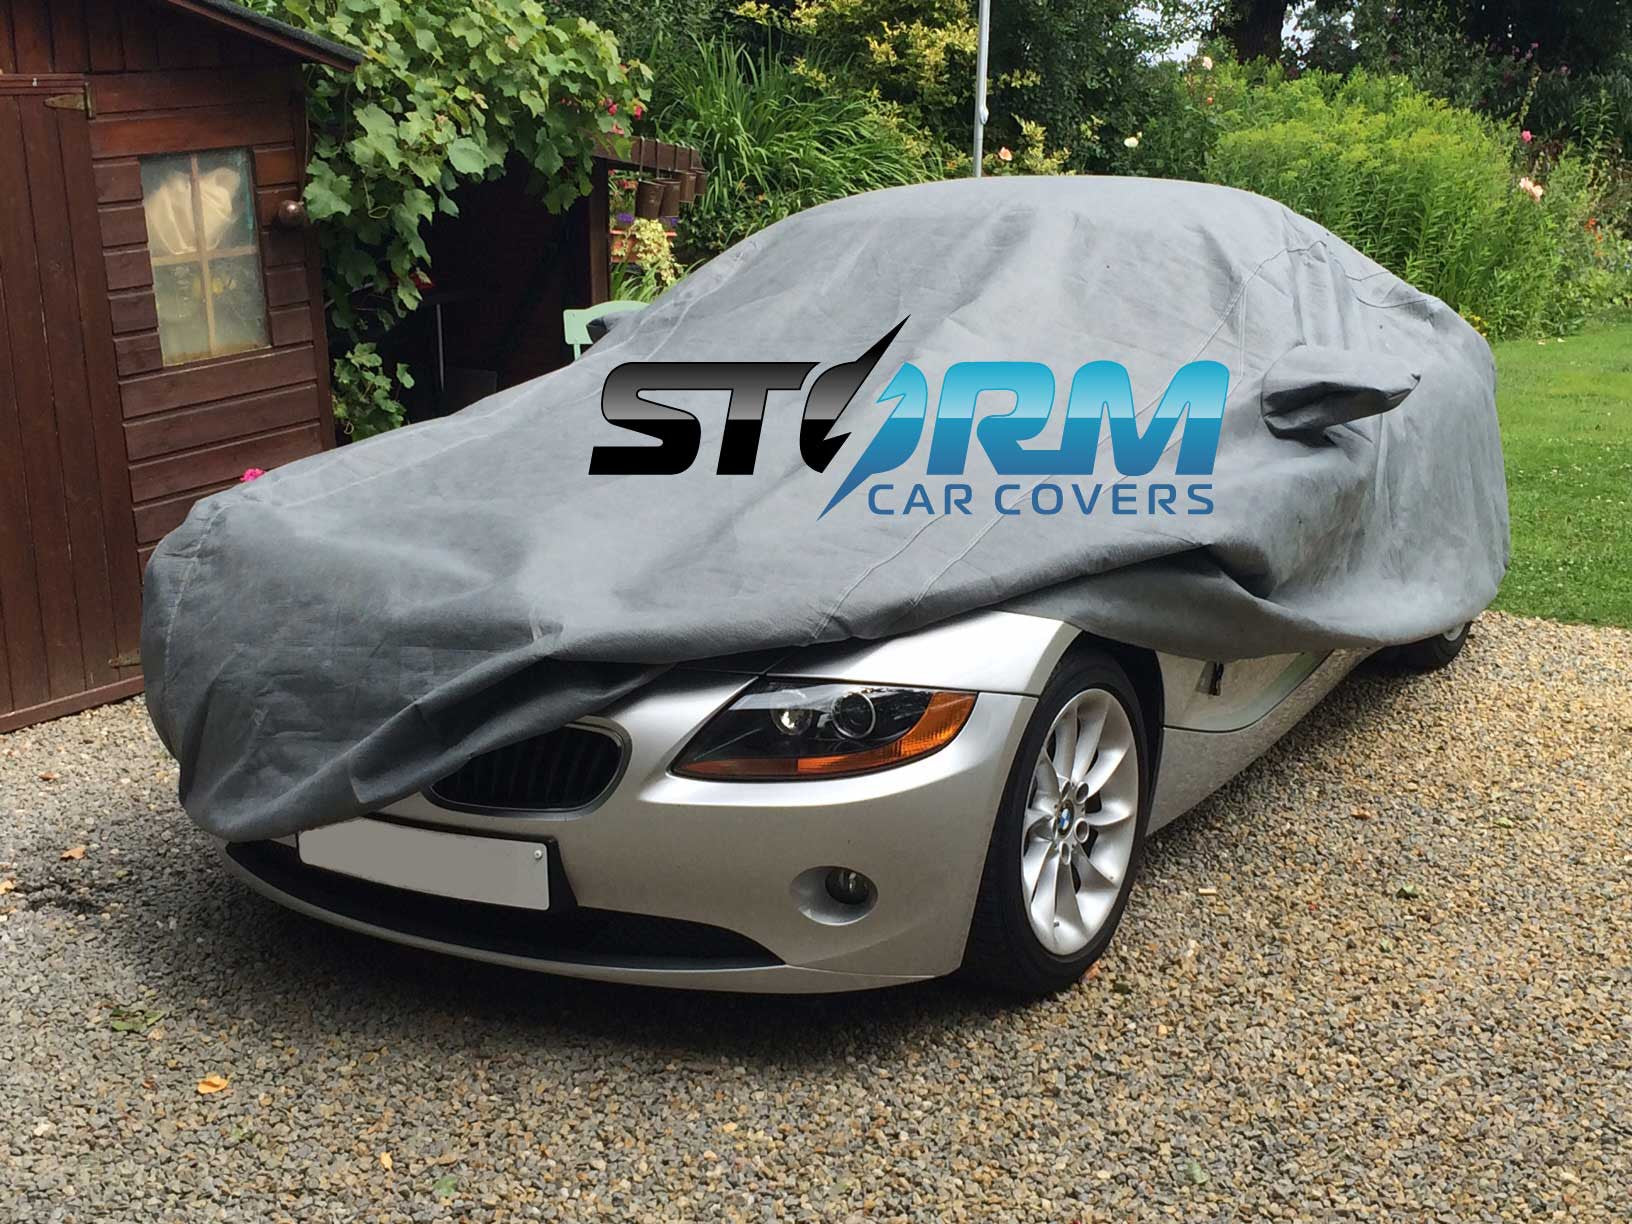 BMW Z4 5 Layer Car Cover Fitted Water Proof In Out door Rain